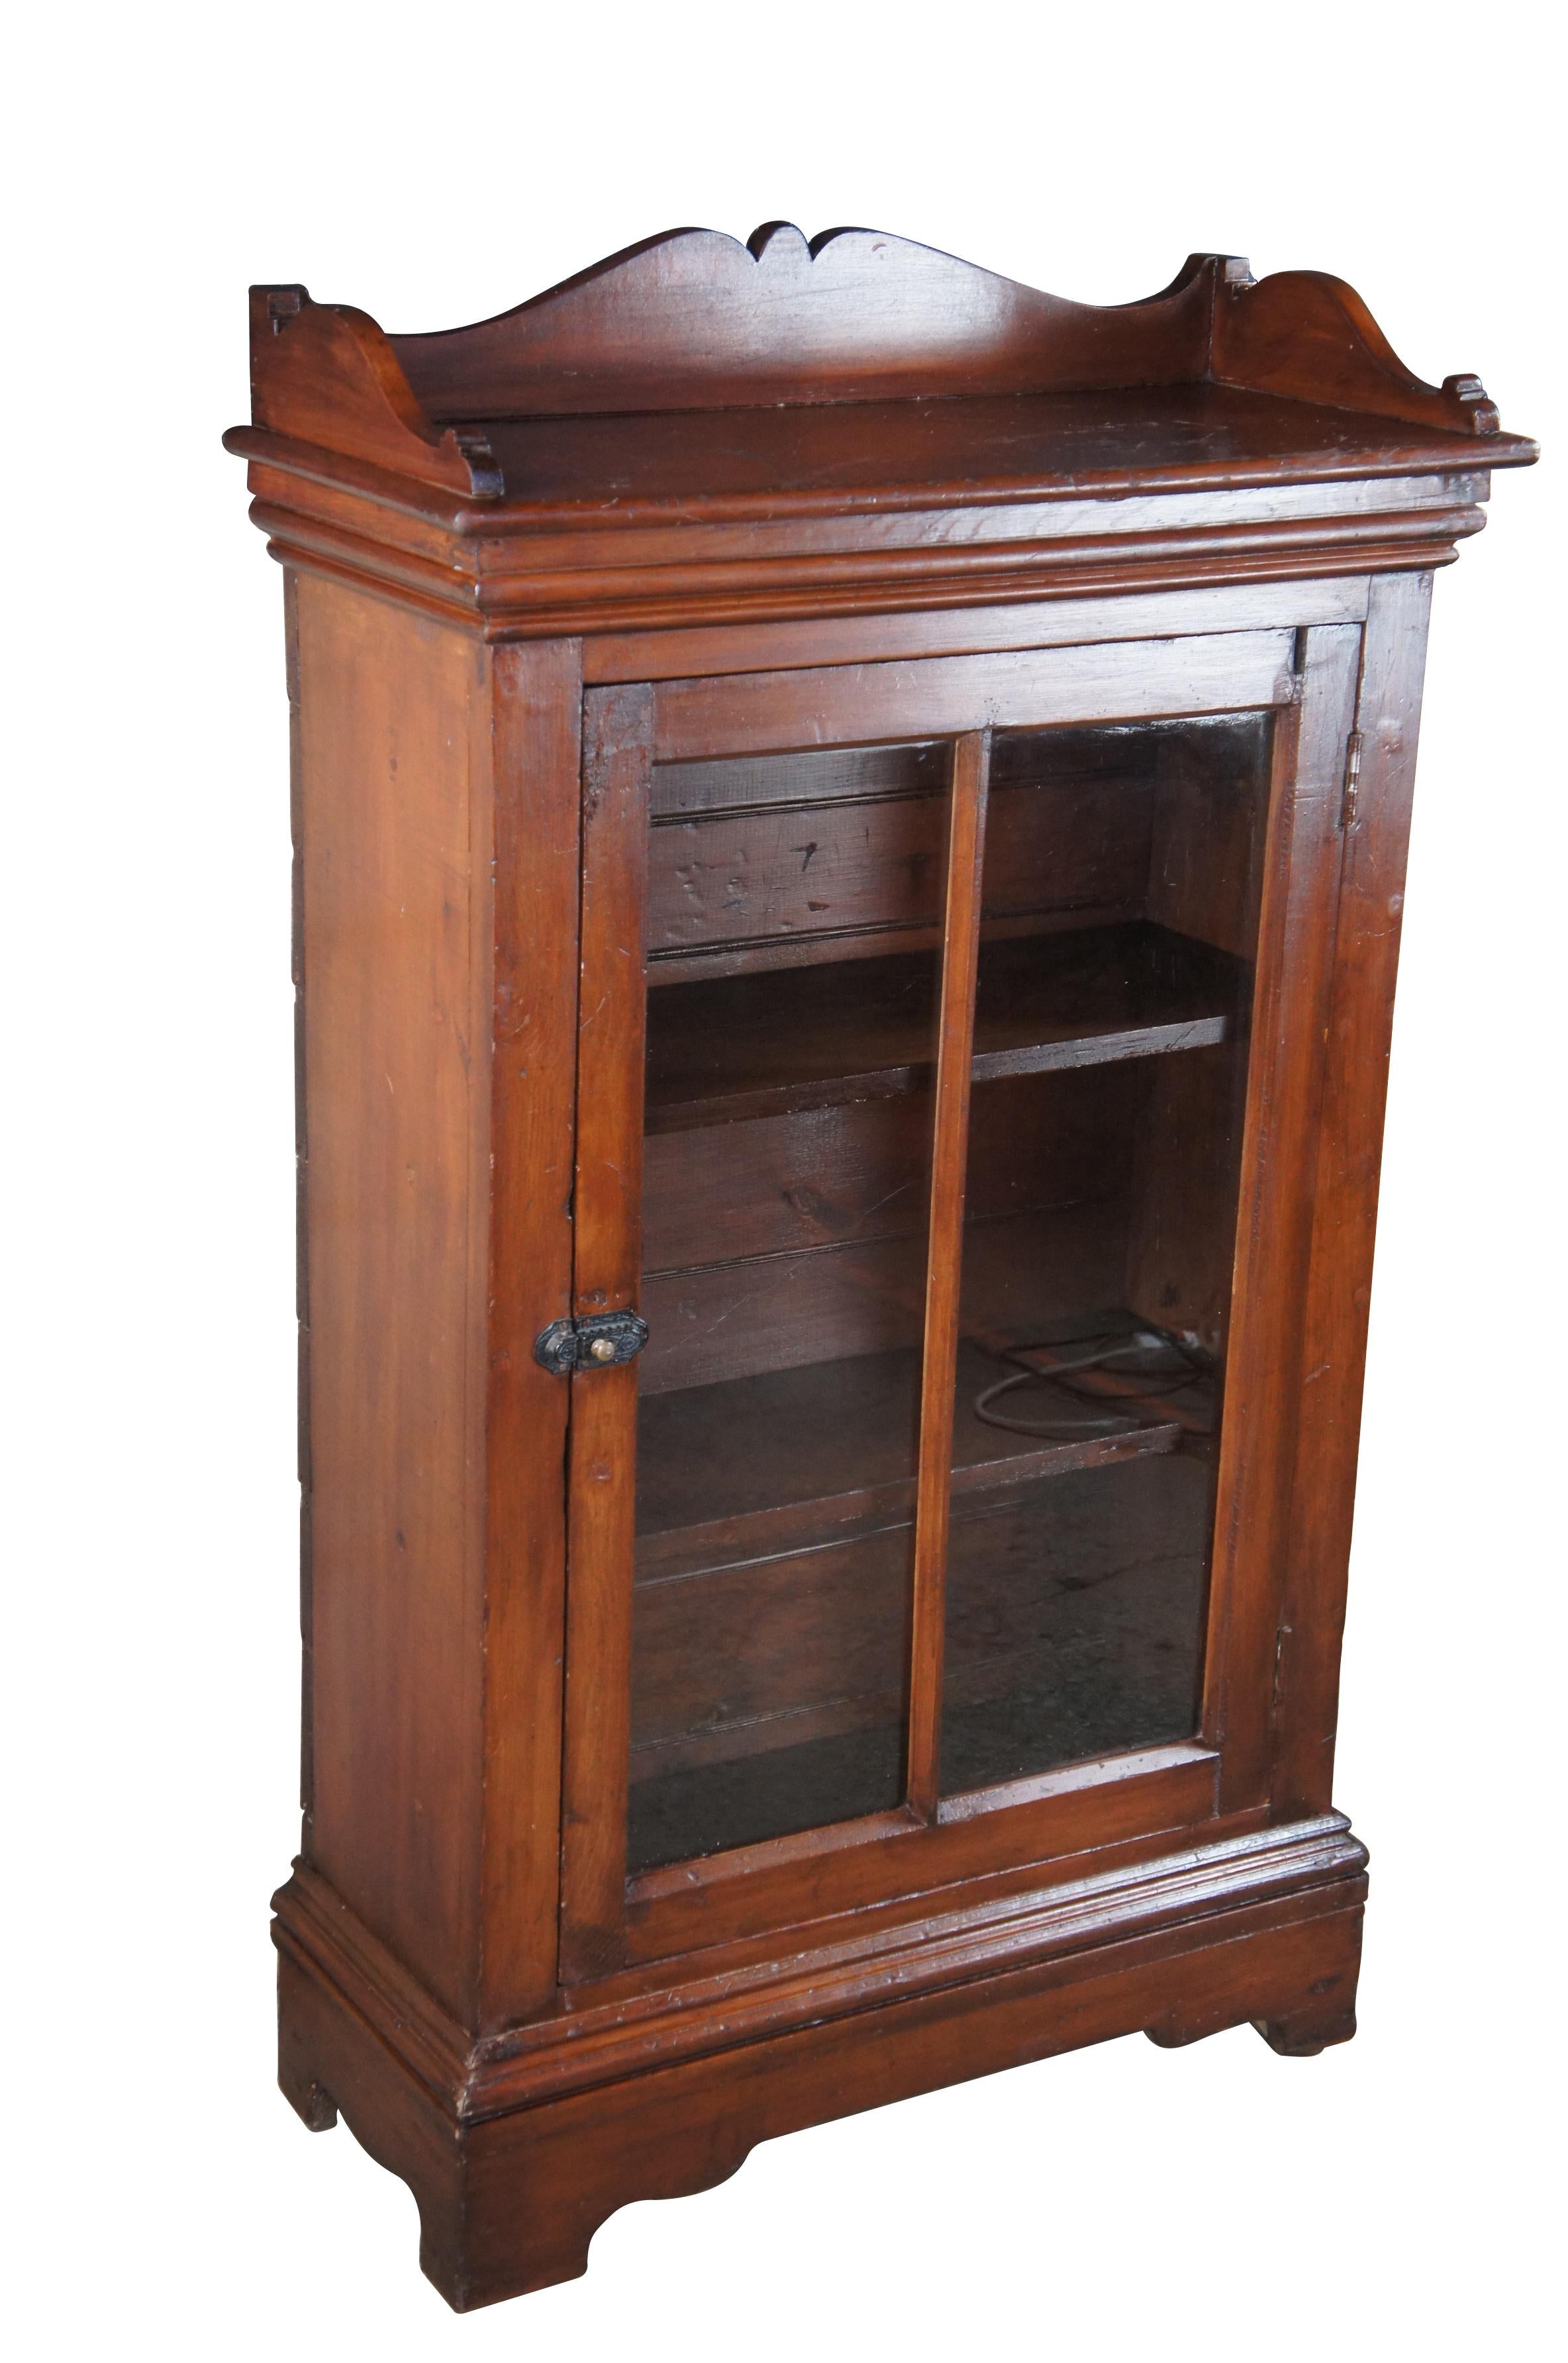 19th Century American Victorian curio / display cabinet.  Features a rectangular form made from pine with serpentine backsplash.  A central door opens via metal latch to two interior shelves.  Back is sided with hand cut nails.  

Dimensions:
33